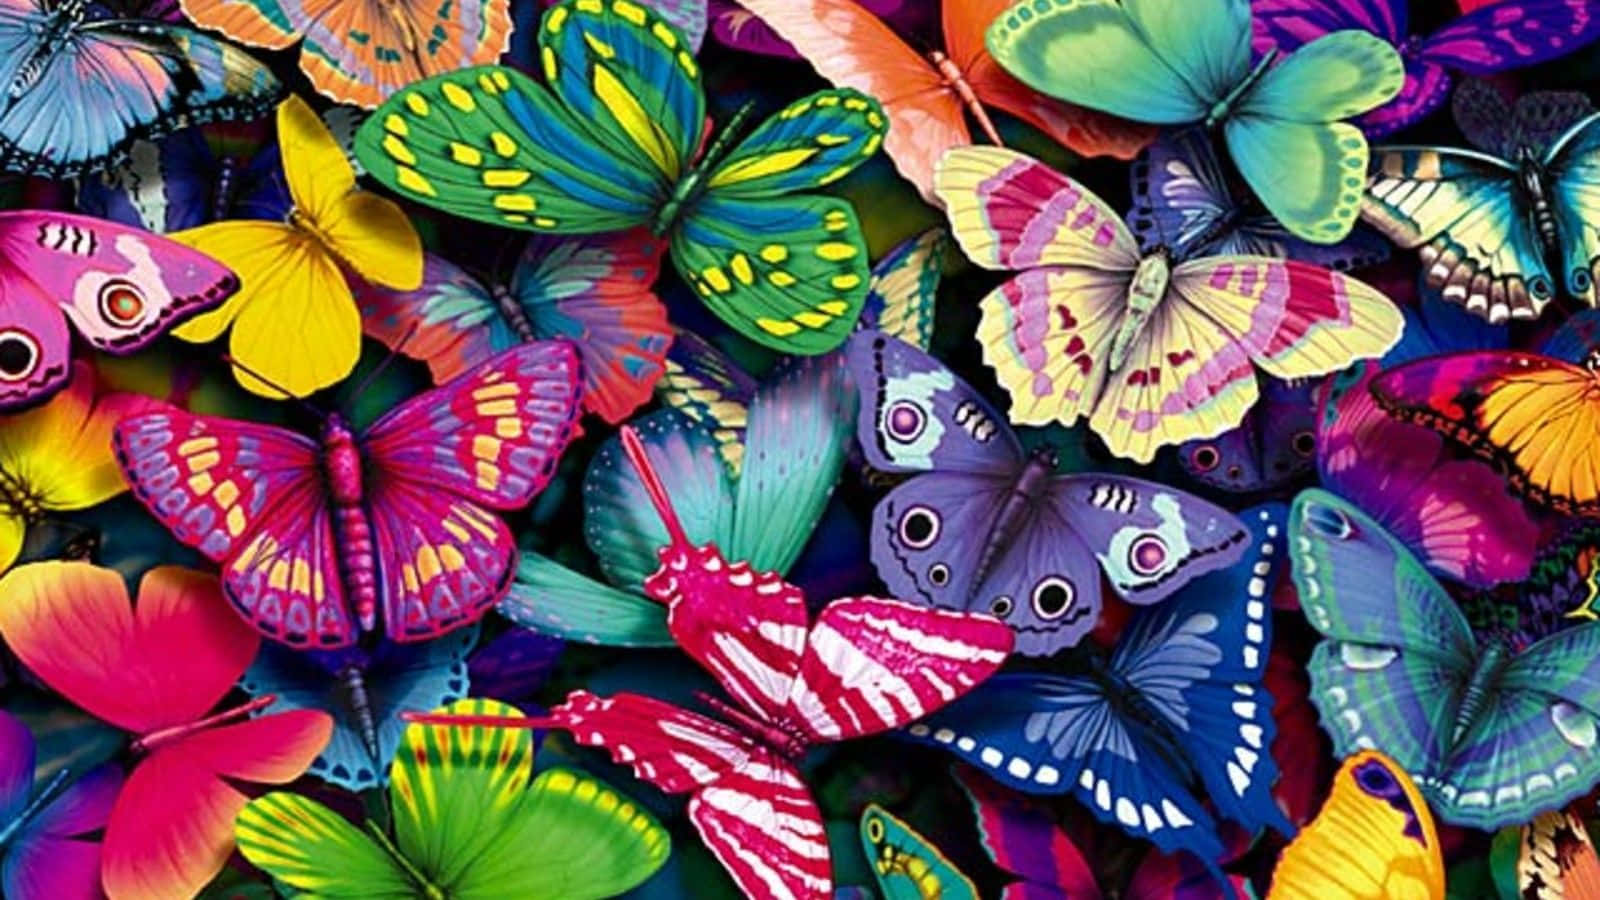 A colorful laptop, decorated with a butterfly-filled design. Wallpaper